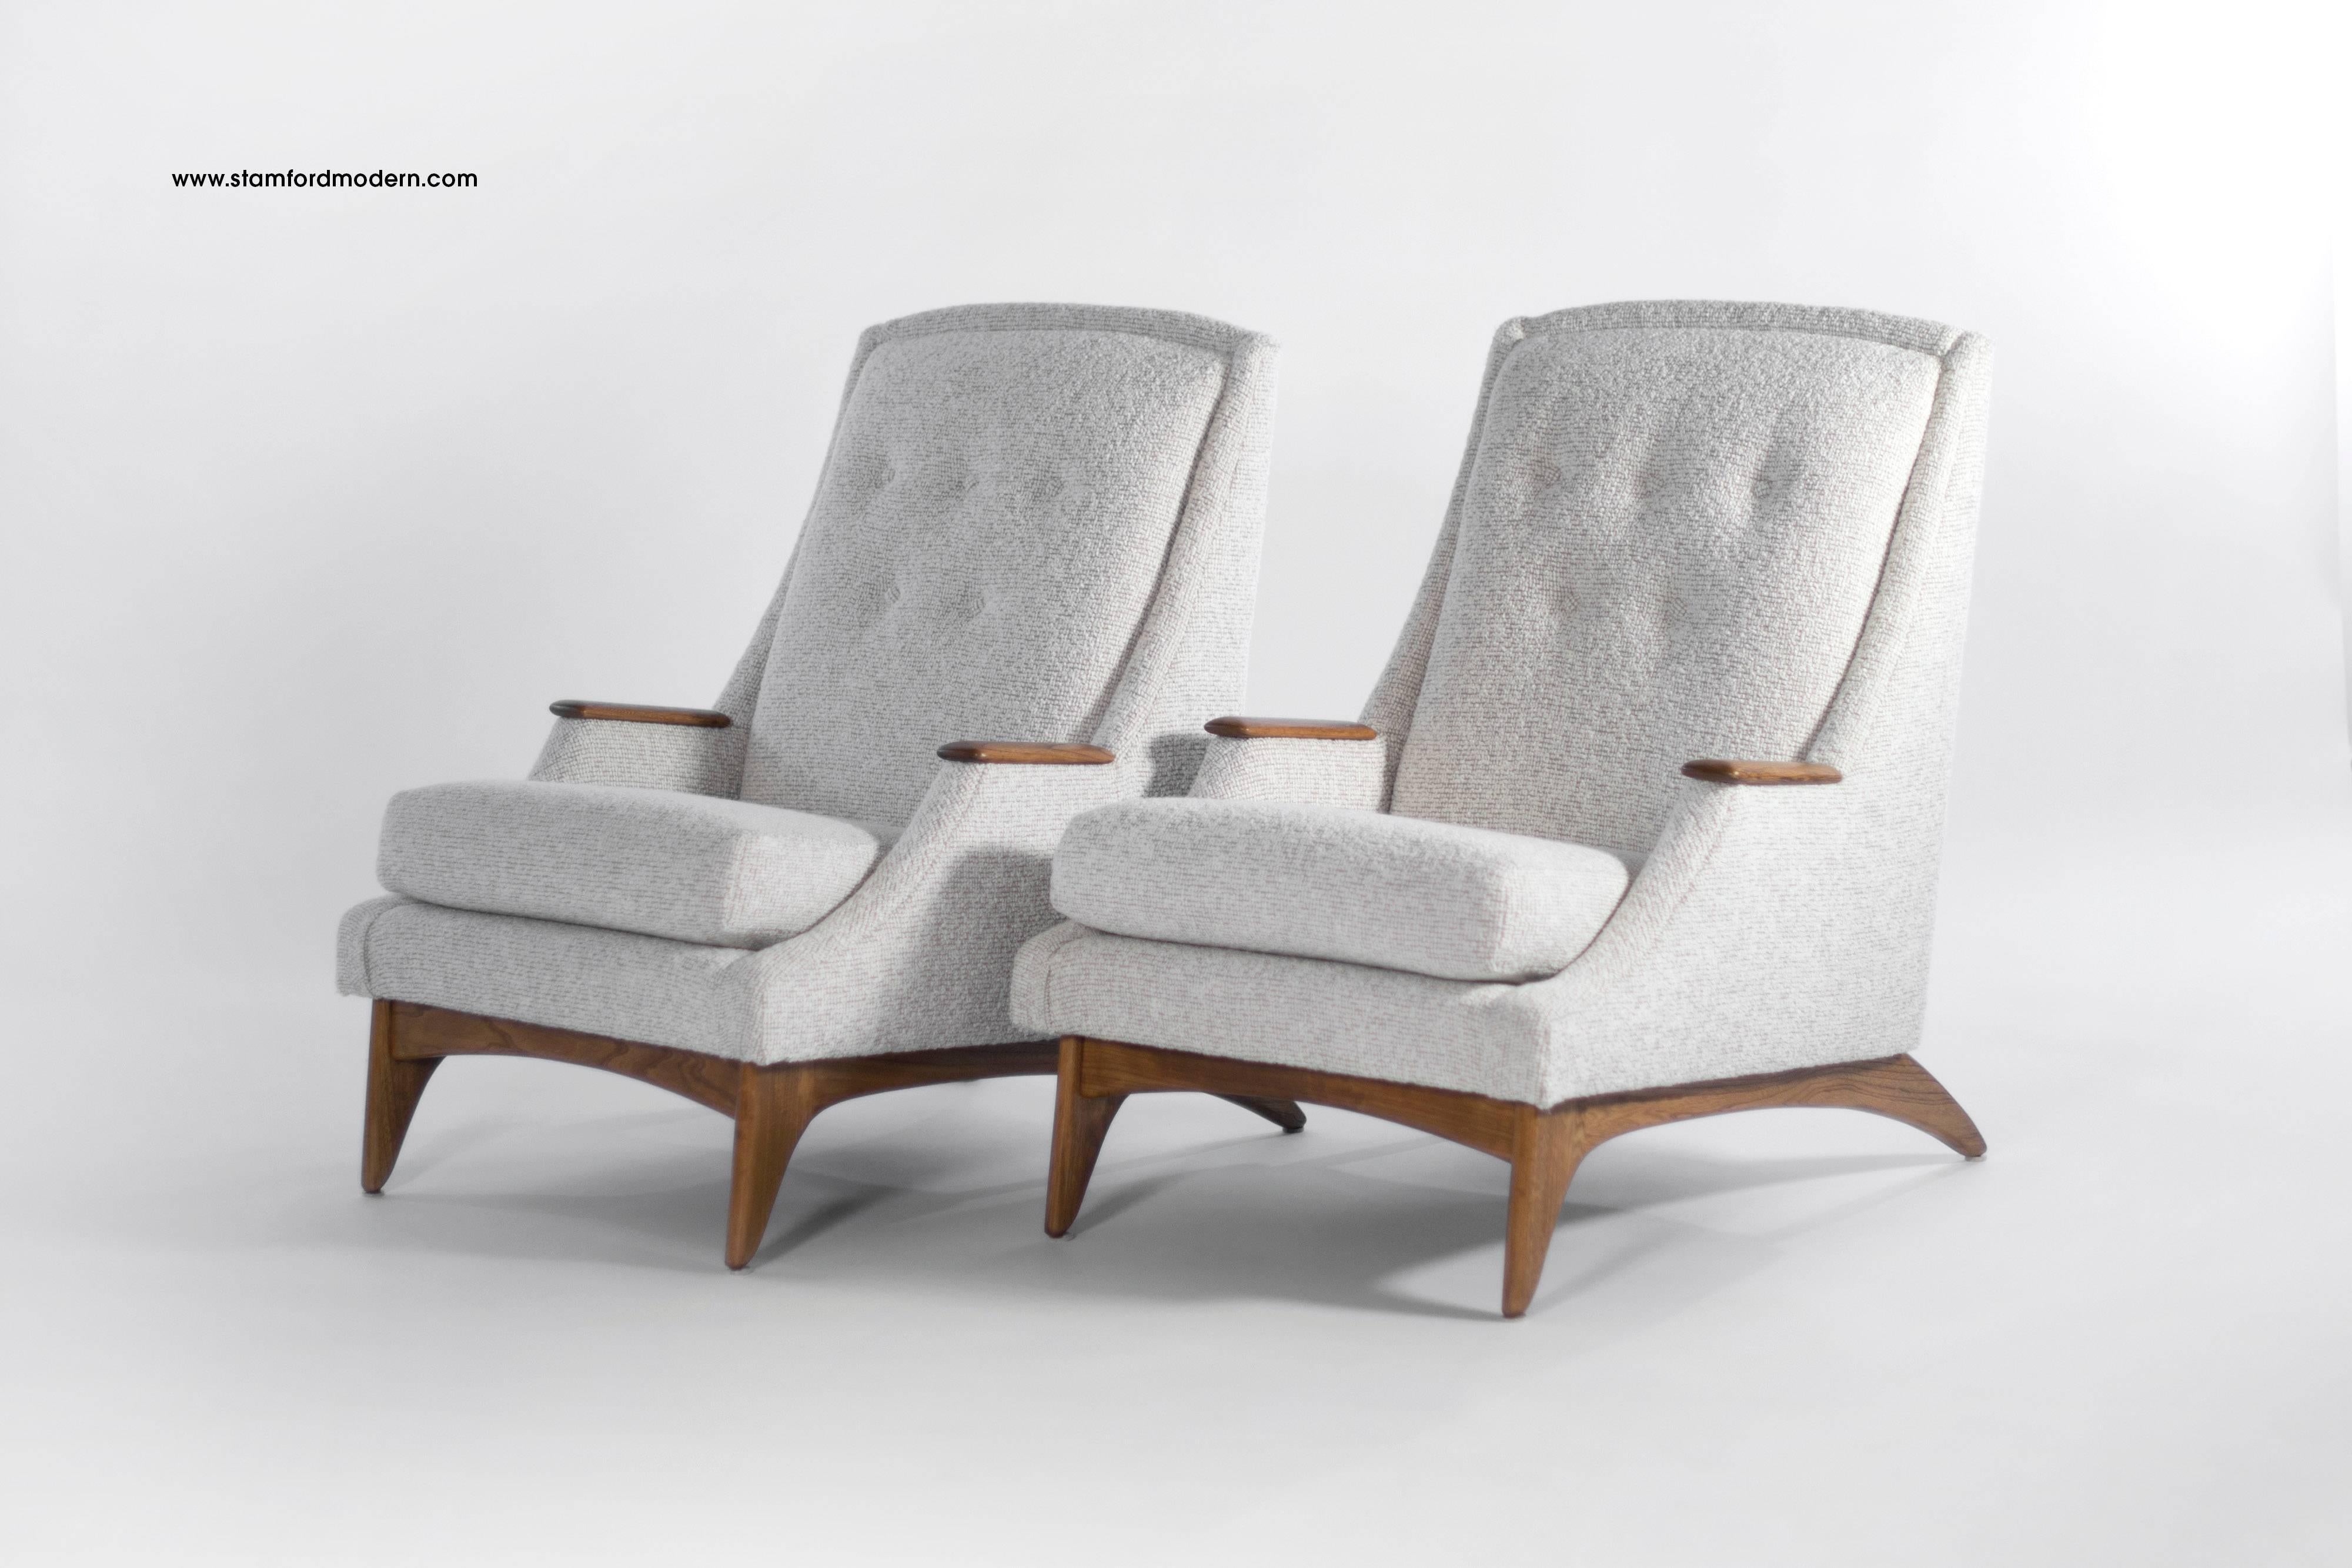 20th Century Sculptural Highback Lounge Chairs by Adrian Pearsall